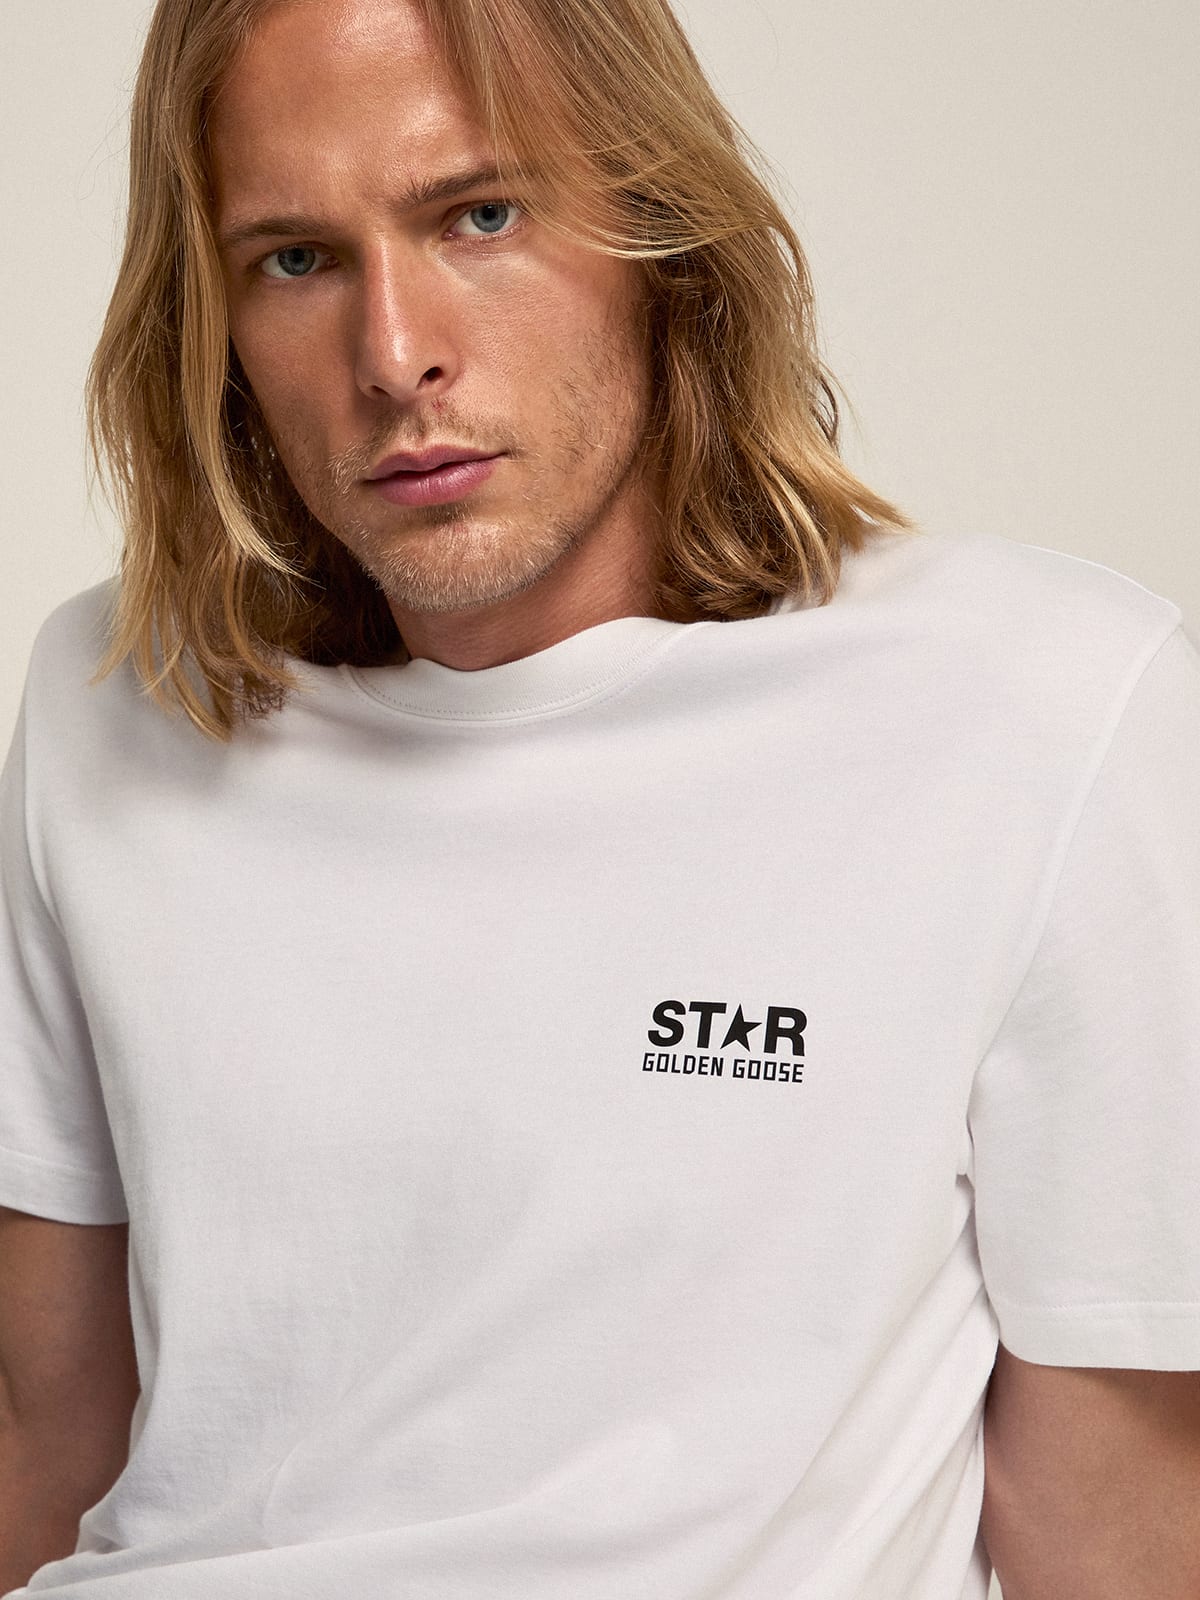 Golden Goose - White T-shirt with contrasting black logo on the front in 